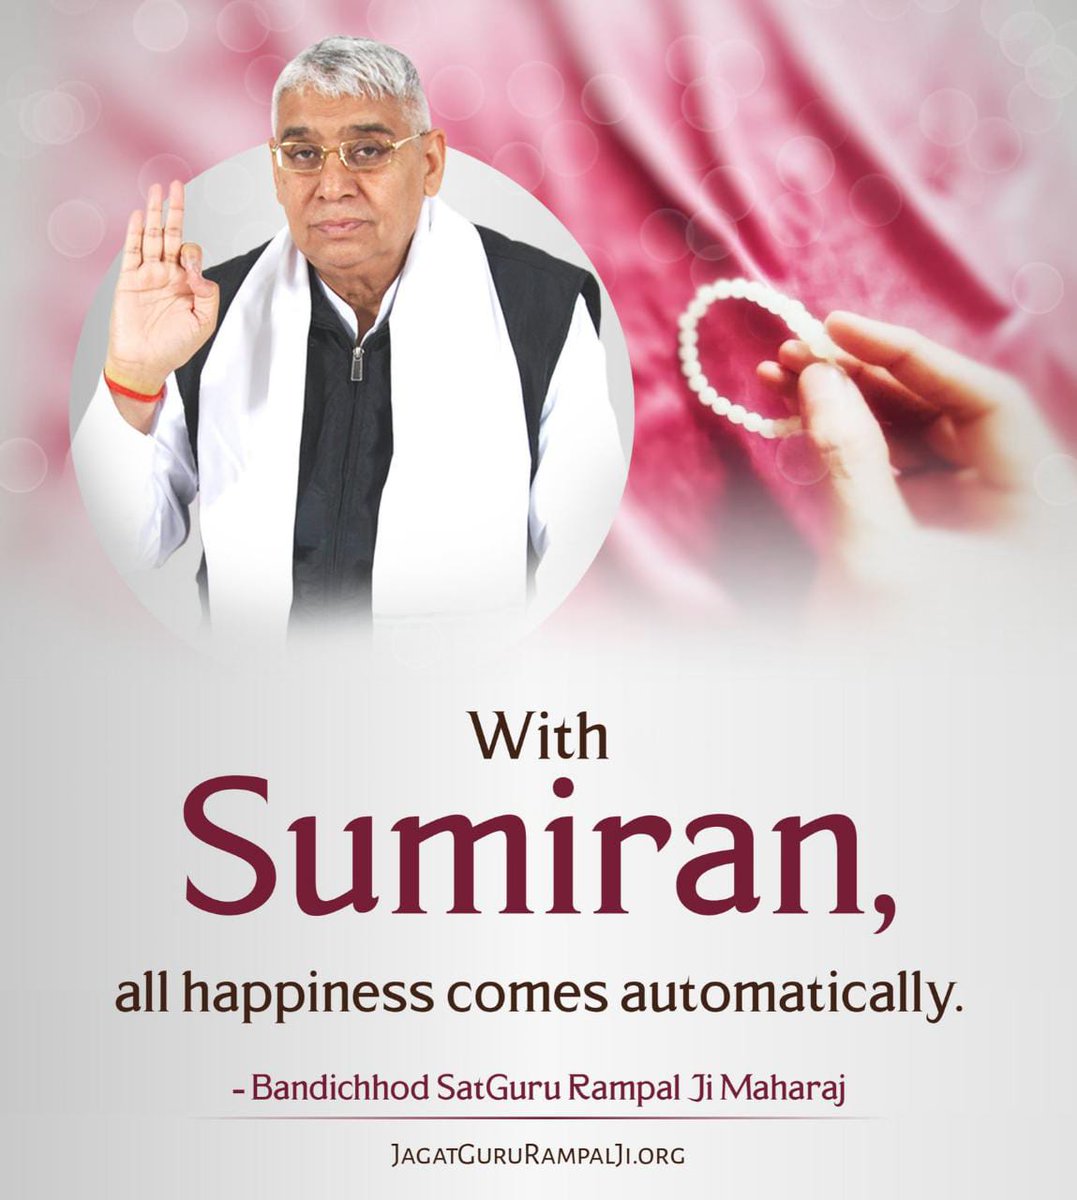 #GodNightThursday
With sumiran, all the happiness comes automatically.
👉 Must Visit: Satlok Ashram Youtube Channel